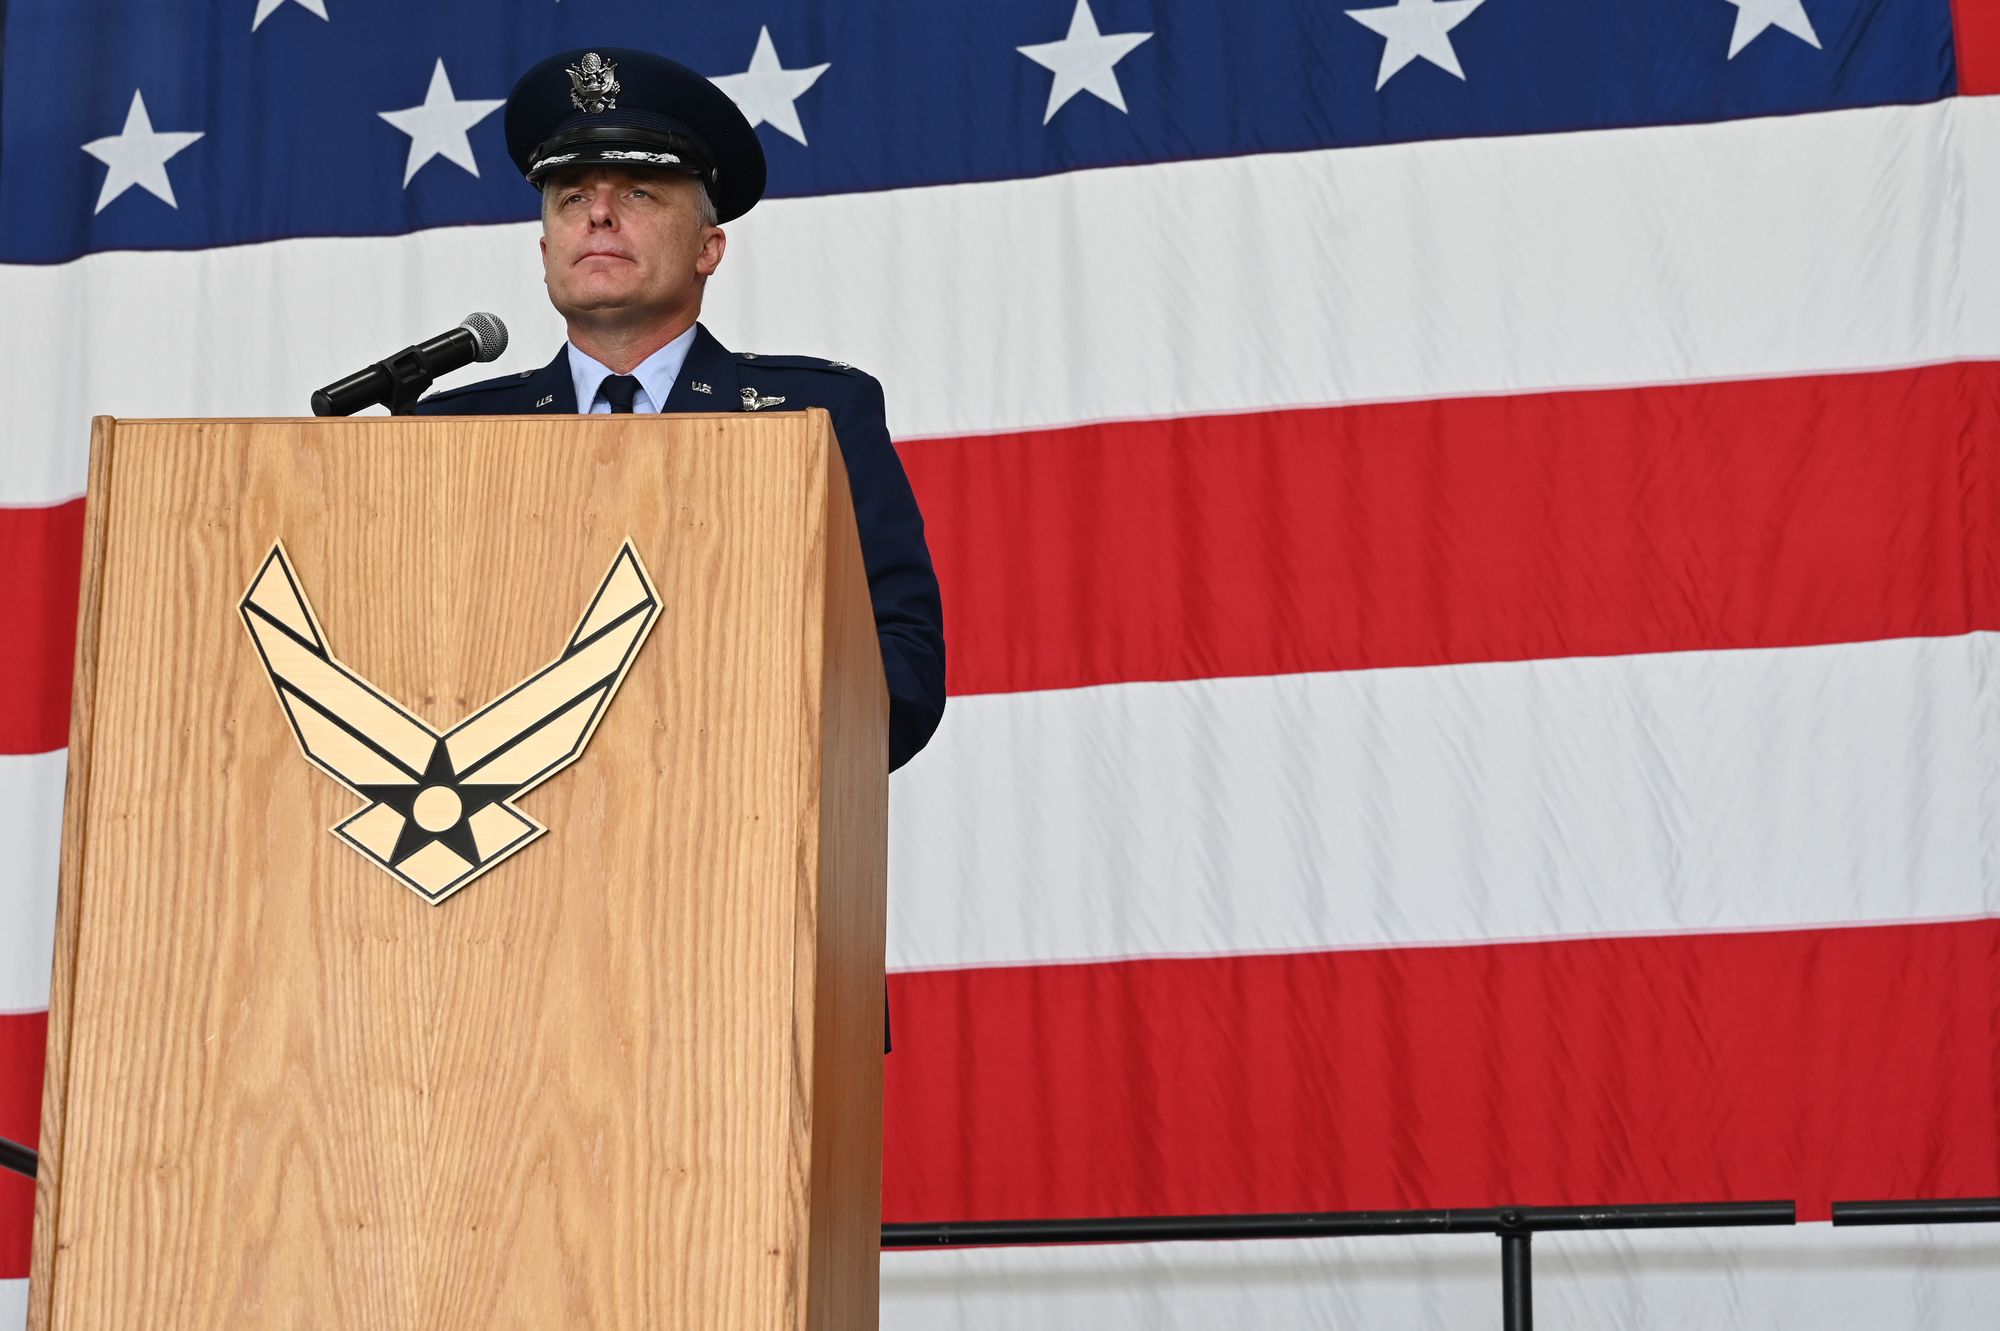 New commander takes reins of 509th Bomb Wing